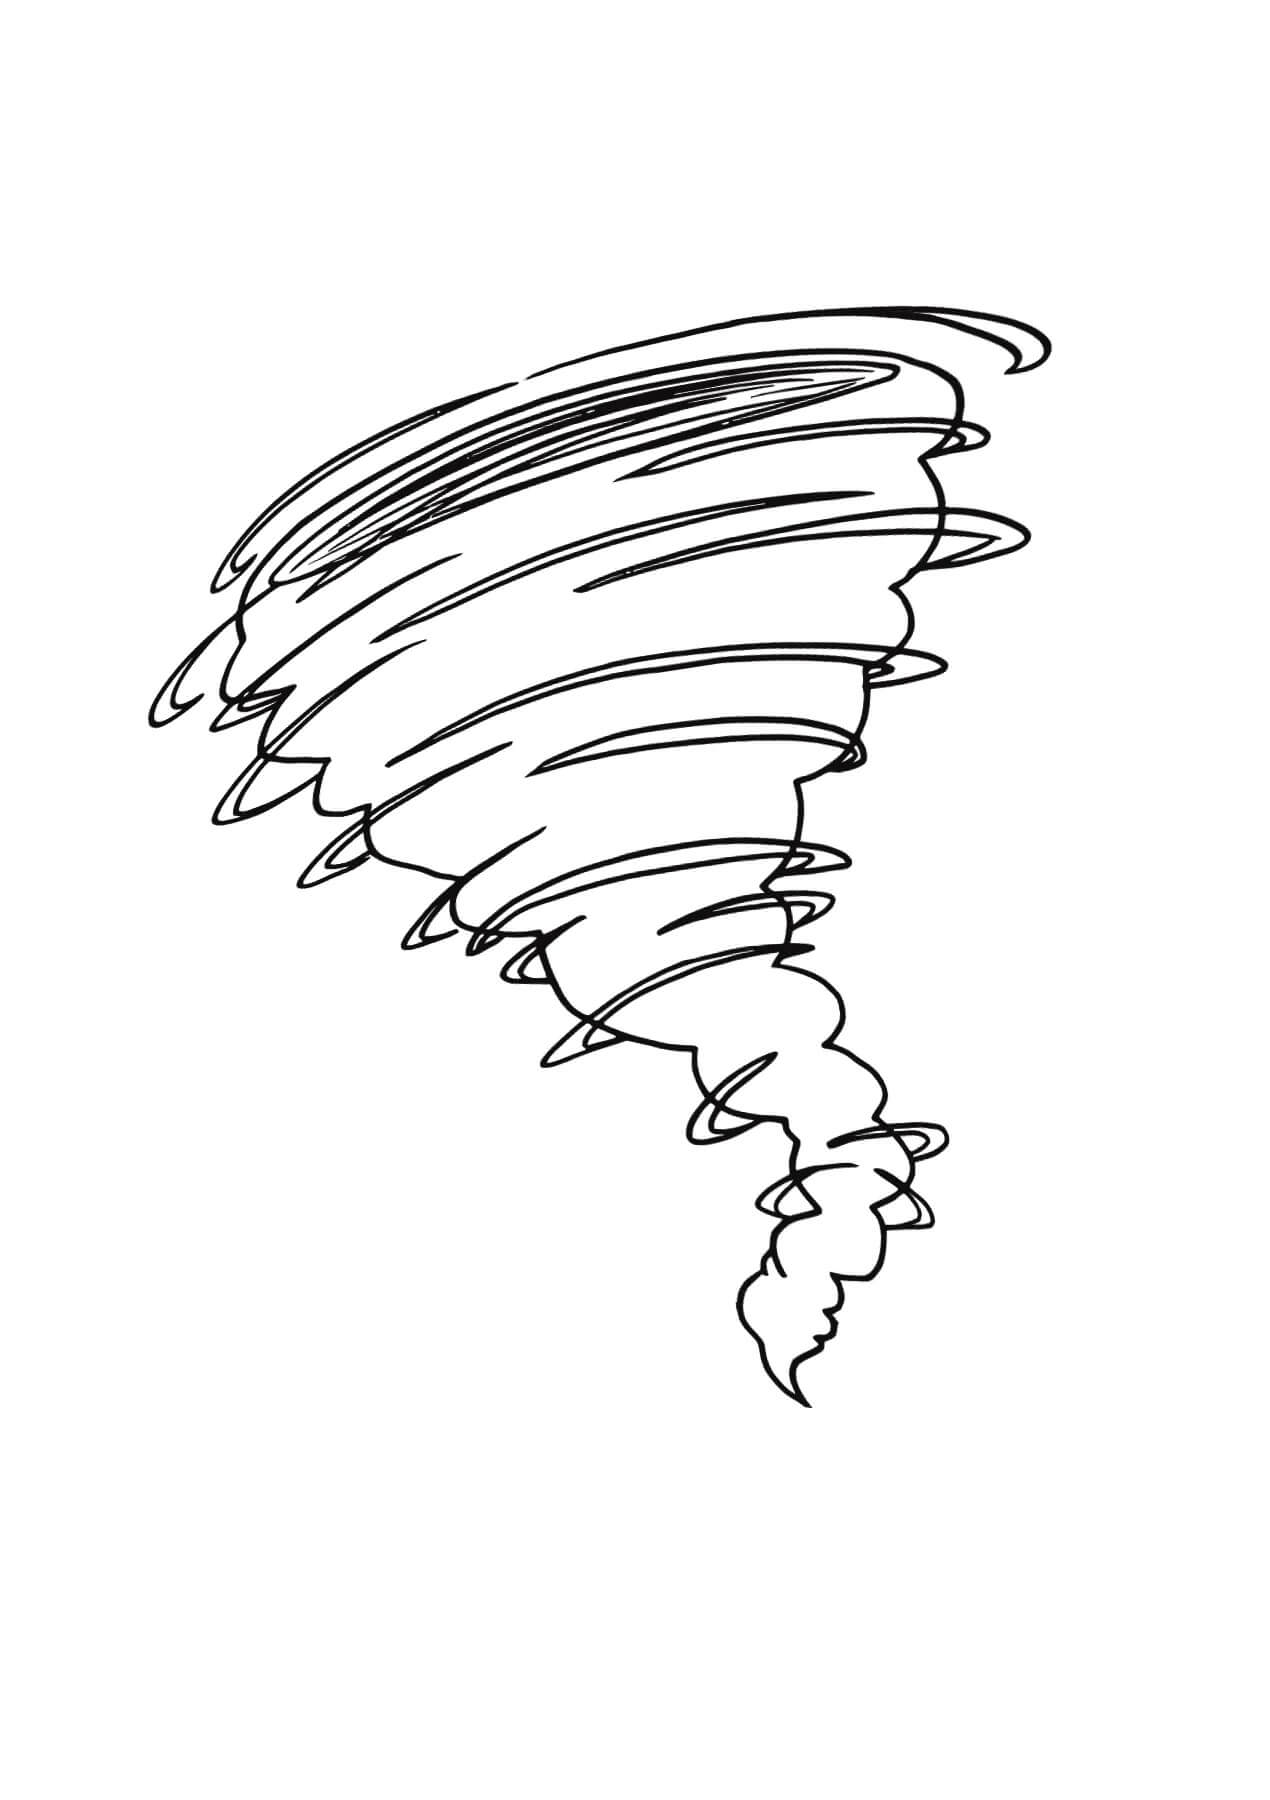 Tornade 5 coloring page